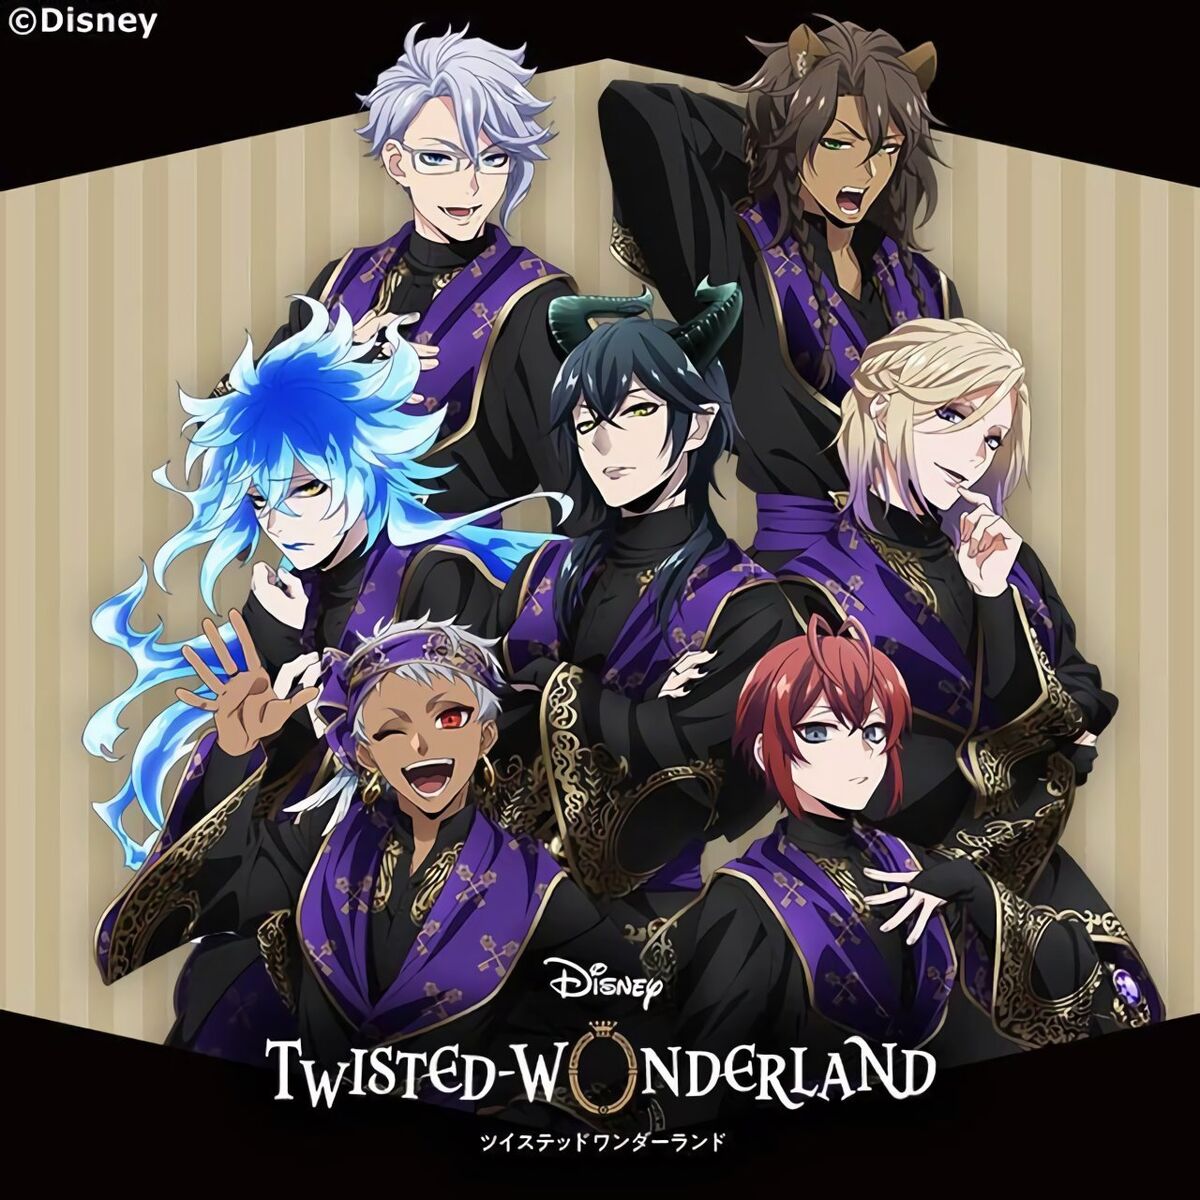 Disney: Twisted-Wonderland is being adapted into an anime for Disney Plus -  Polygon